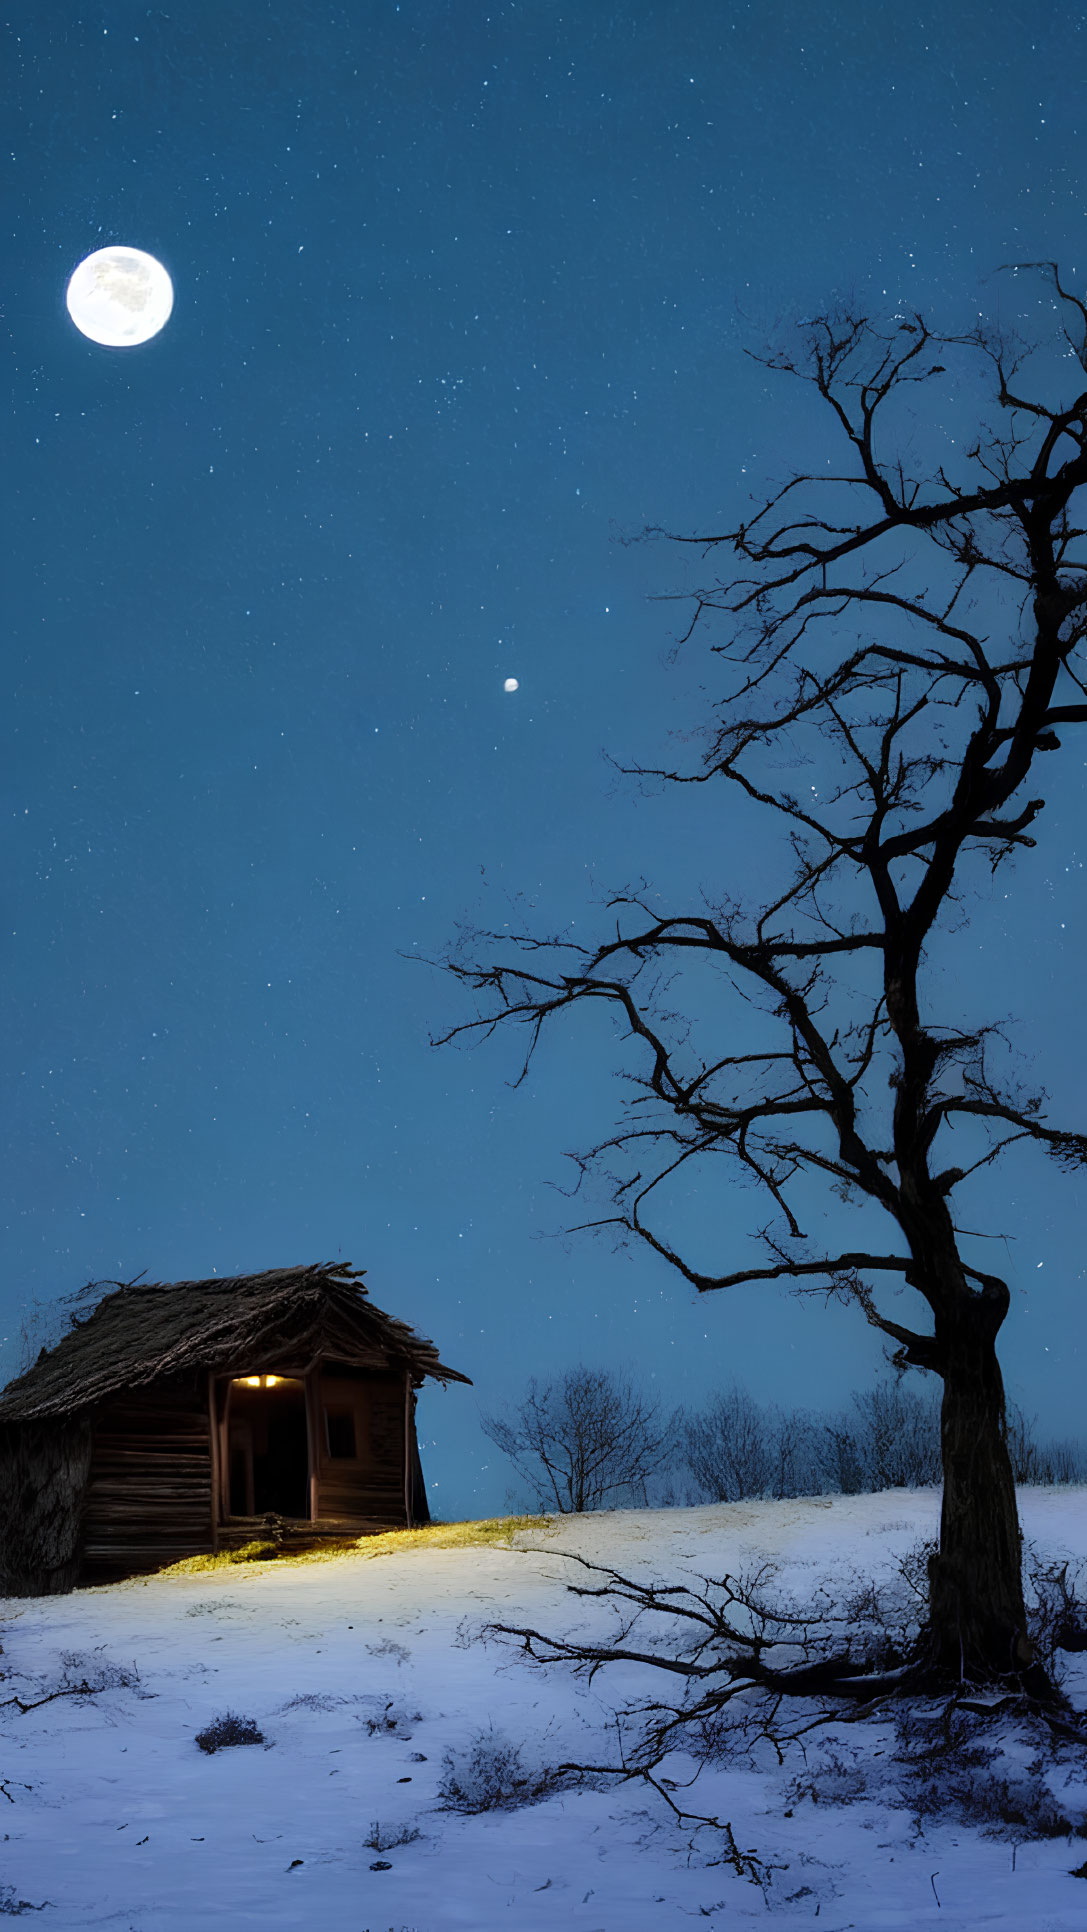 Snow-covered landscape with full moon and stars above, bare tree, and cozy cabin.